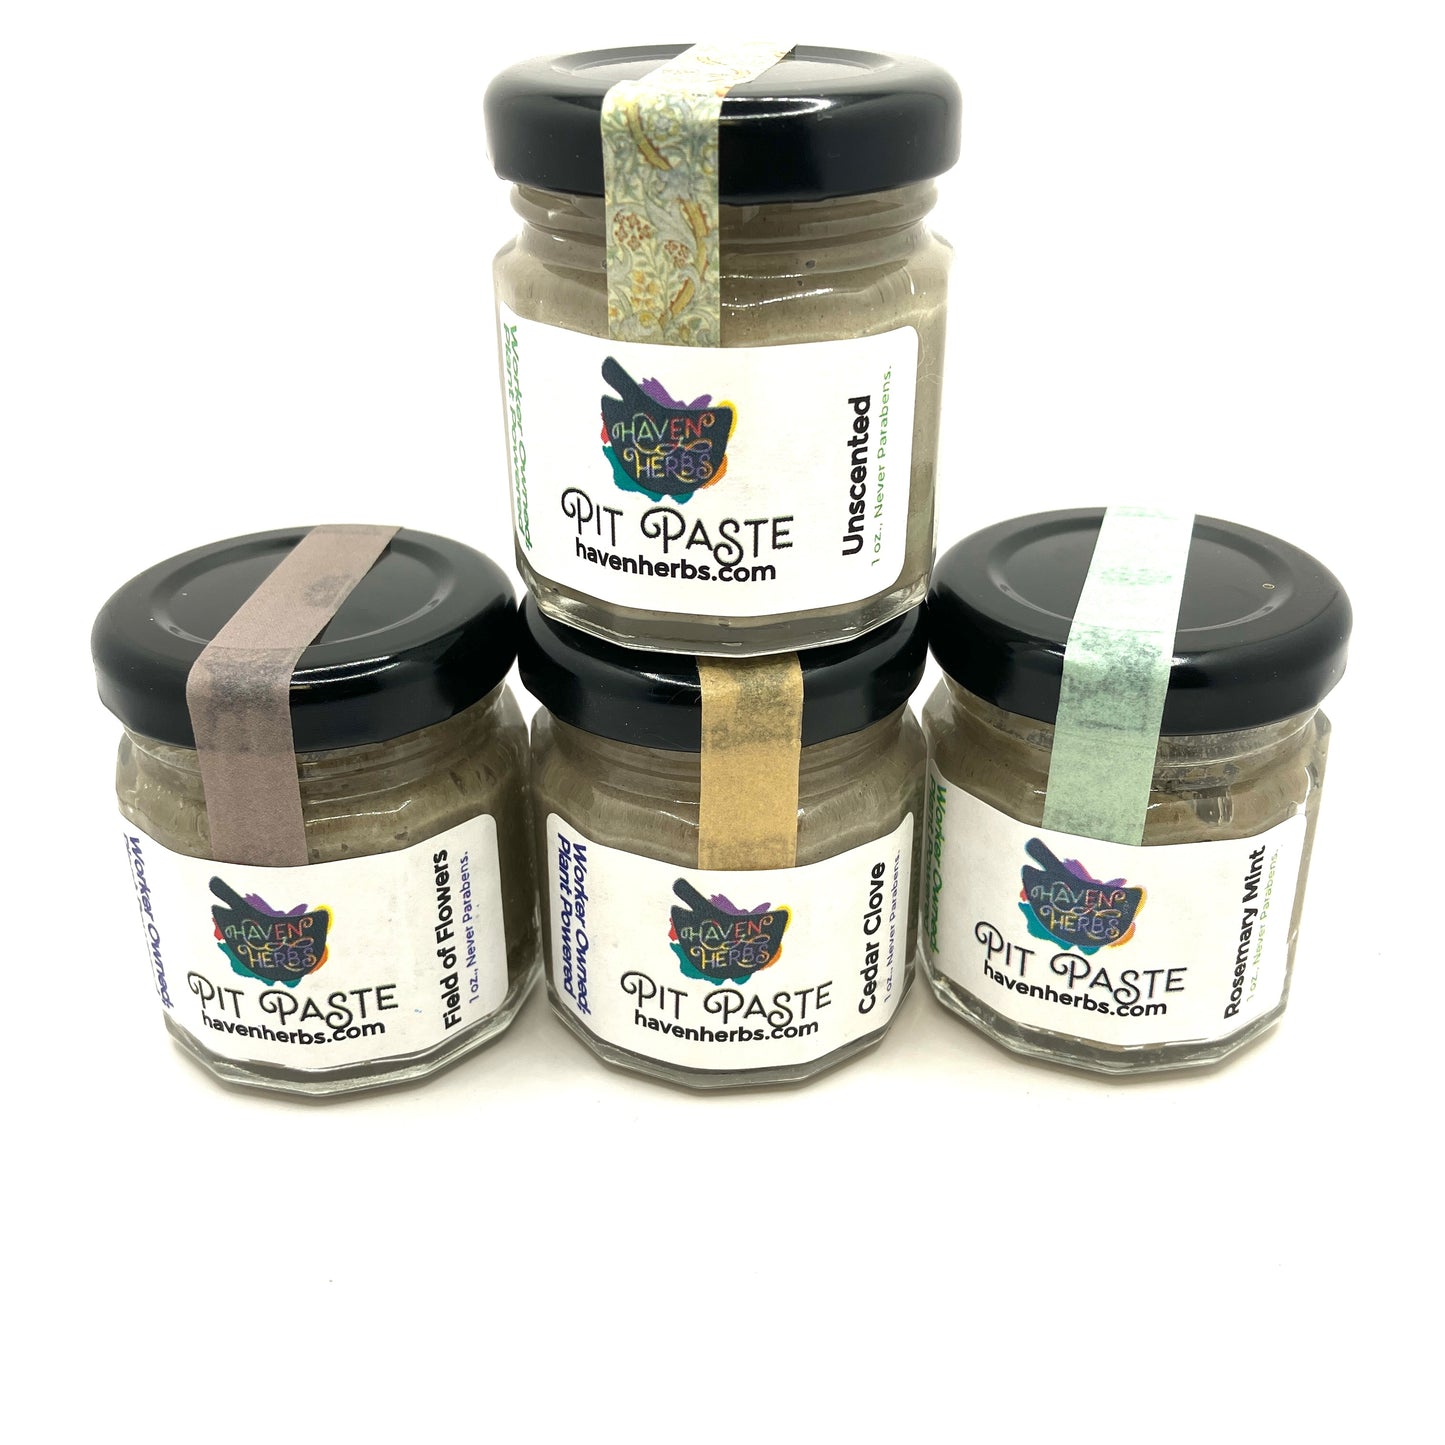 Pit Paste by Haven Herbs. In unscented and three unique scents.